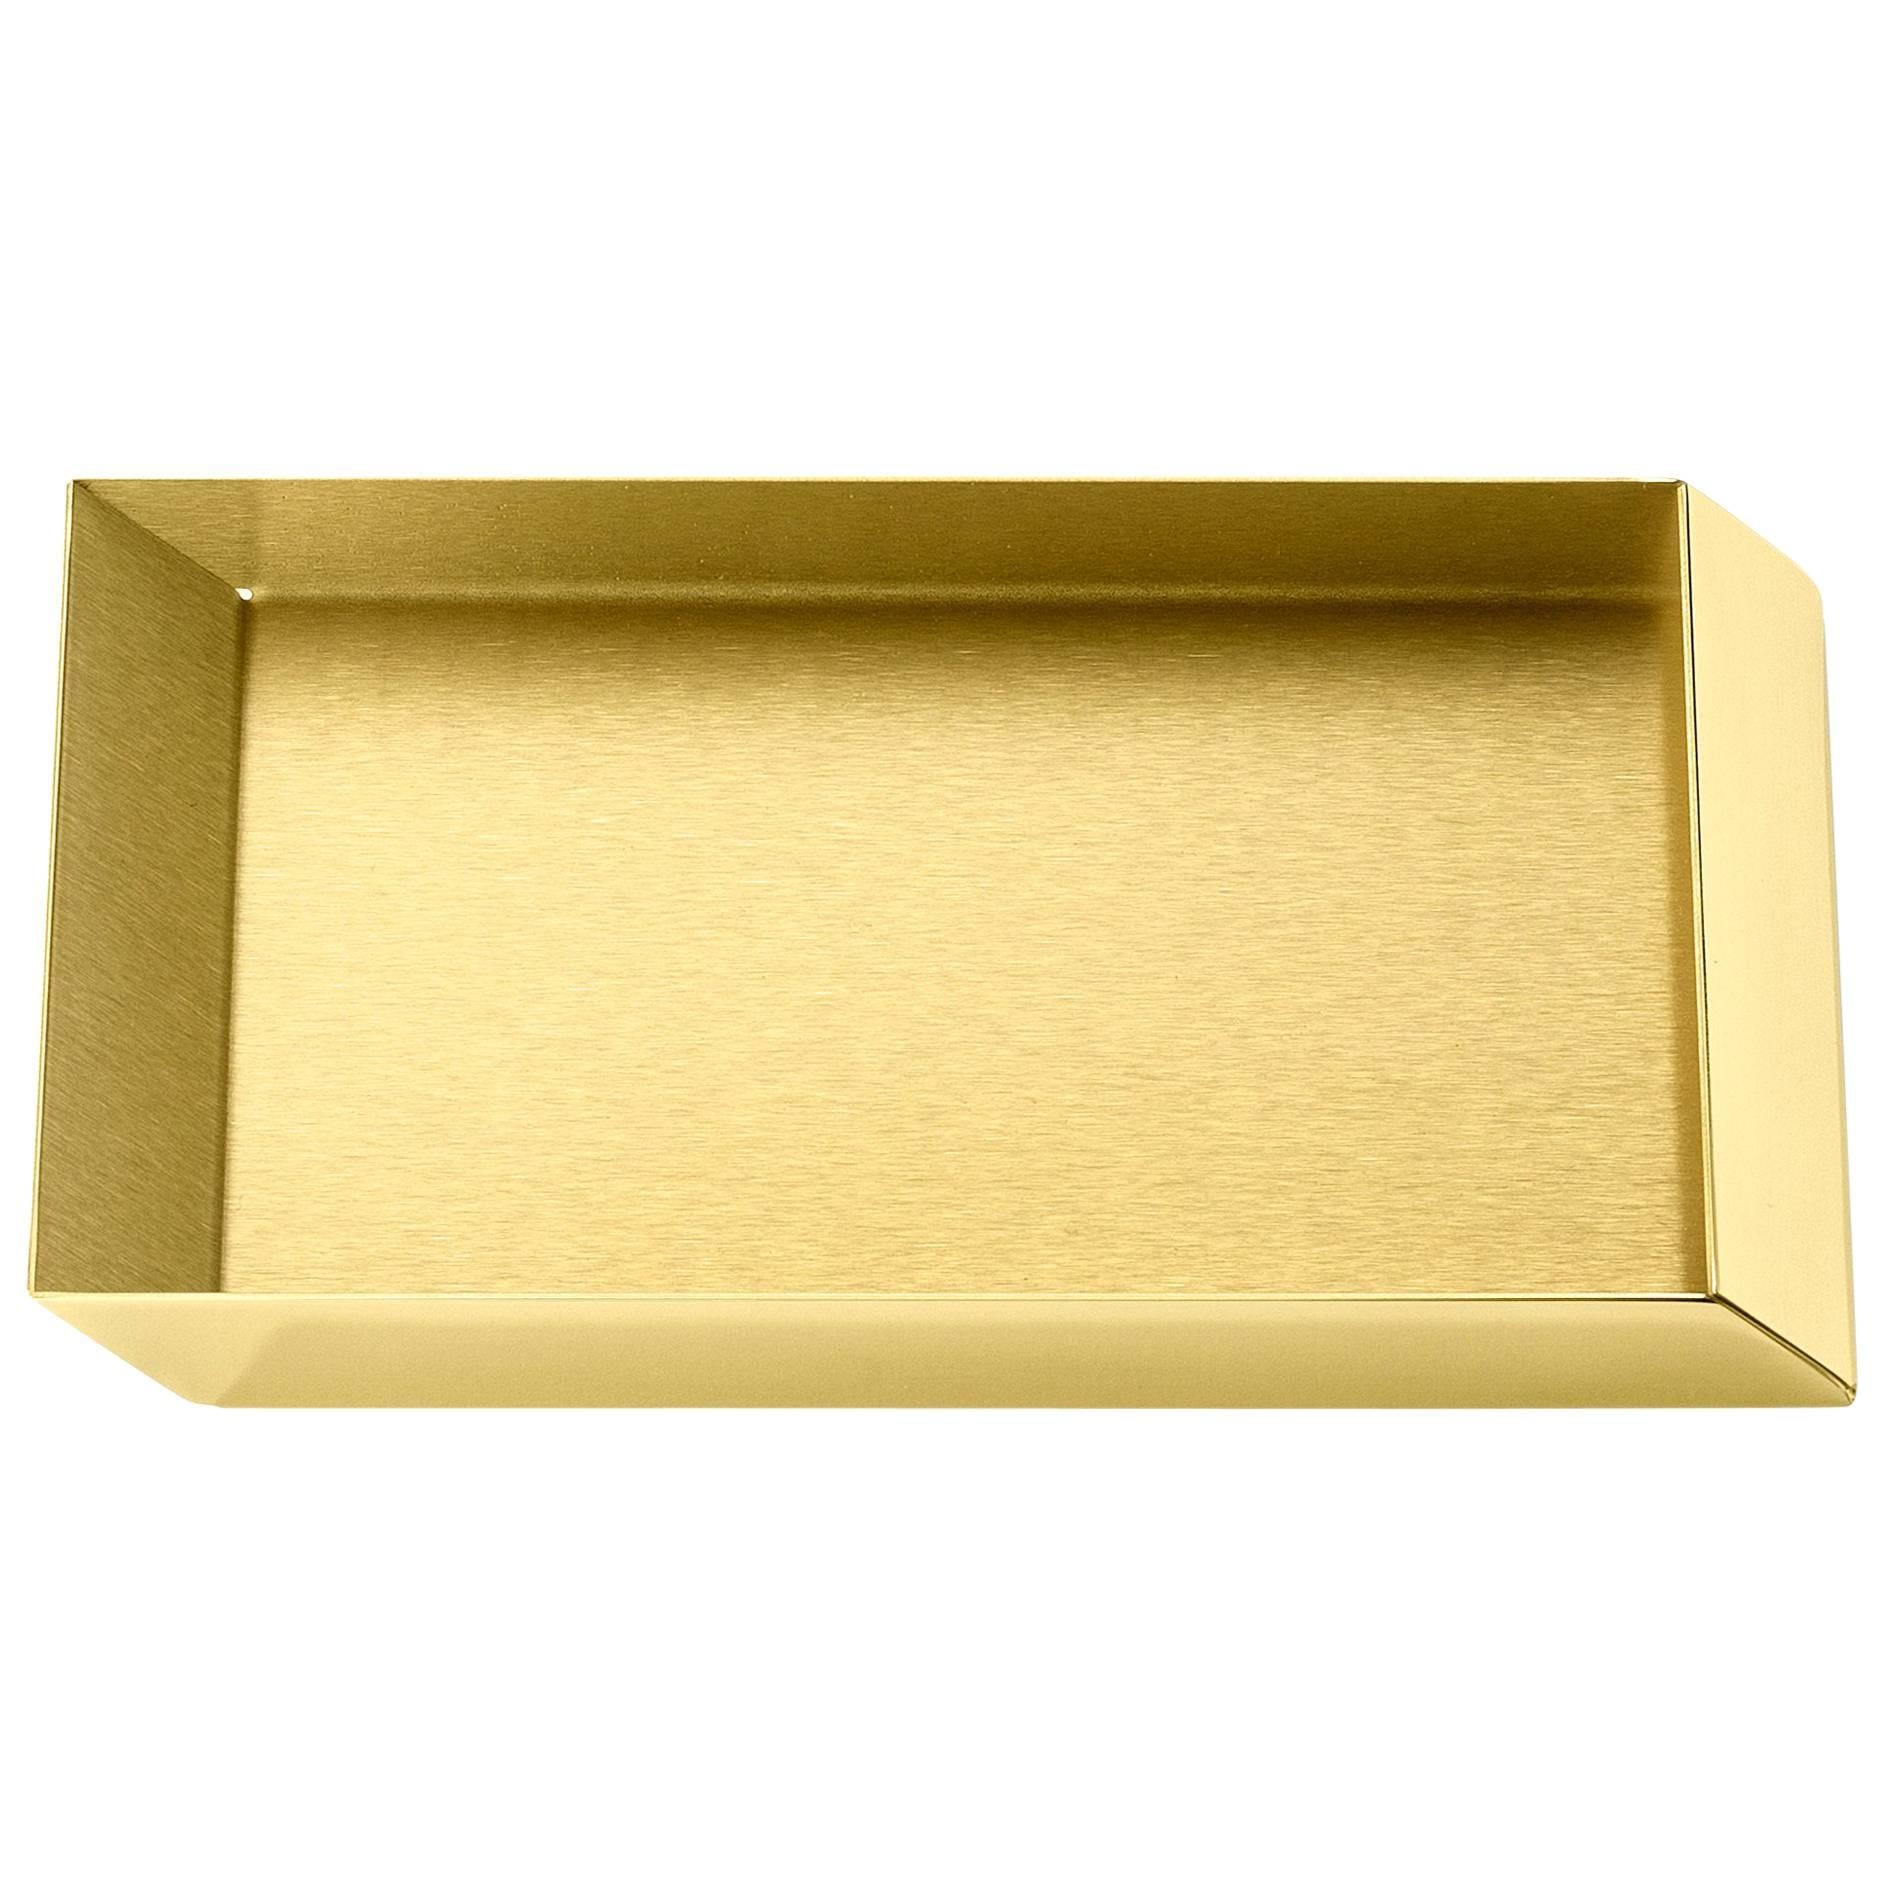 Ghidini 1961 Axonometry Rectangular Small Tray in Polished Brass